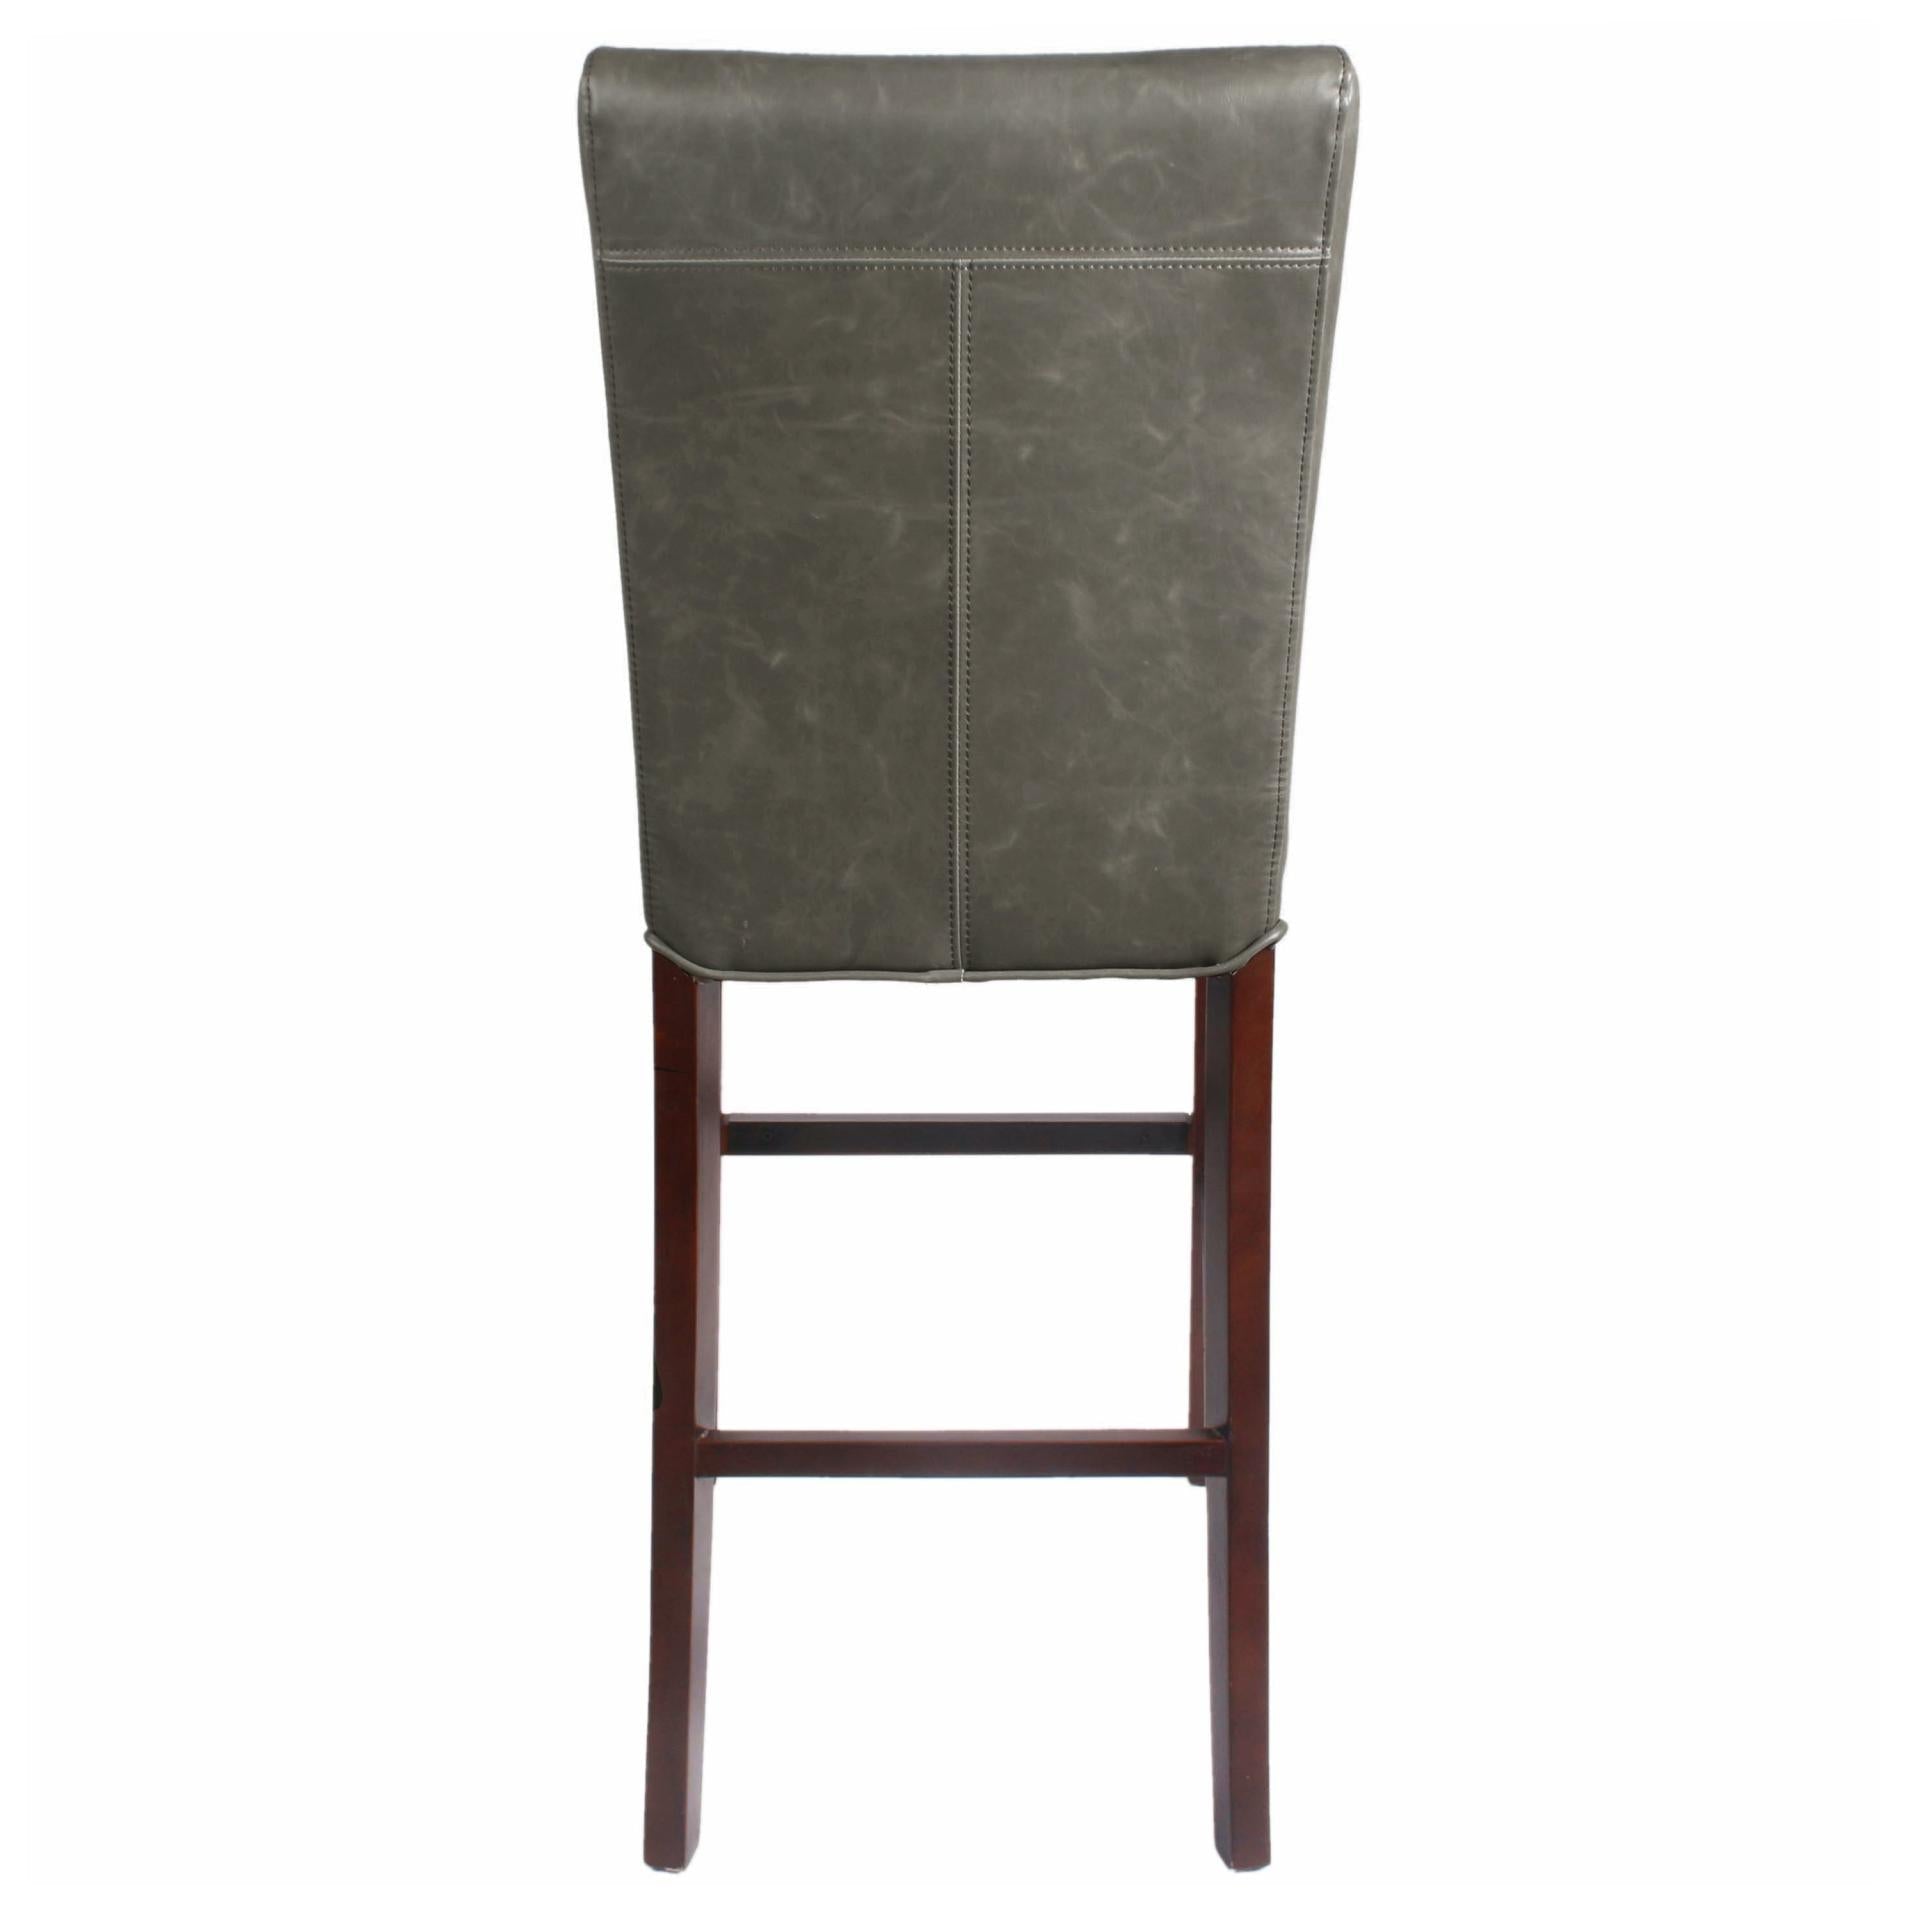 Milton Bonded Leather Bar Stool - What A Room